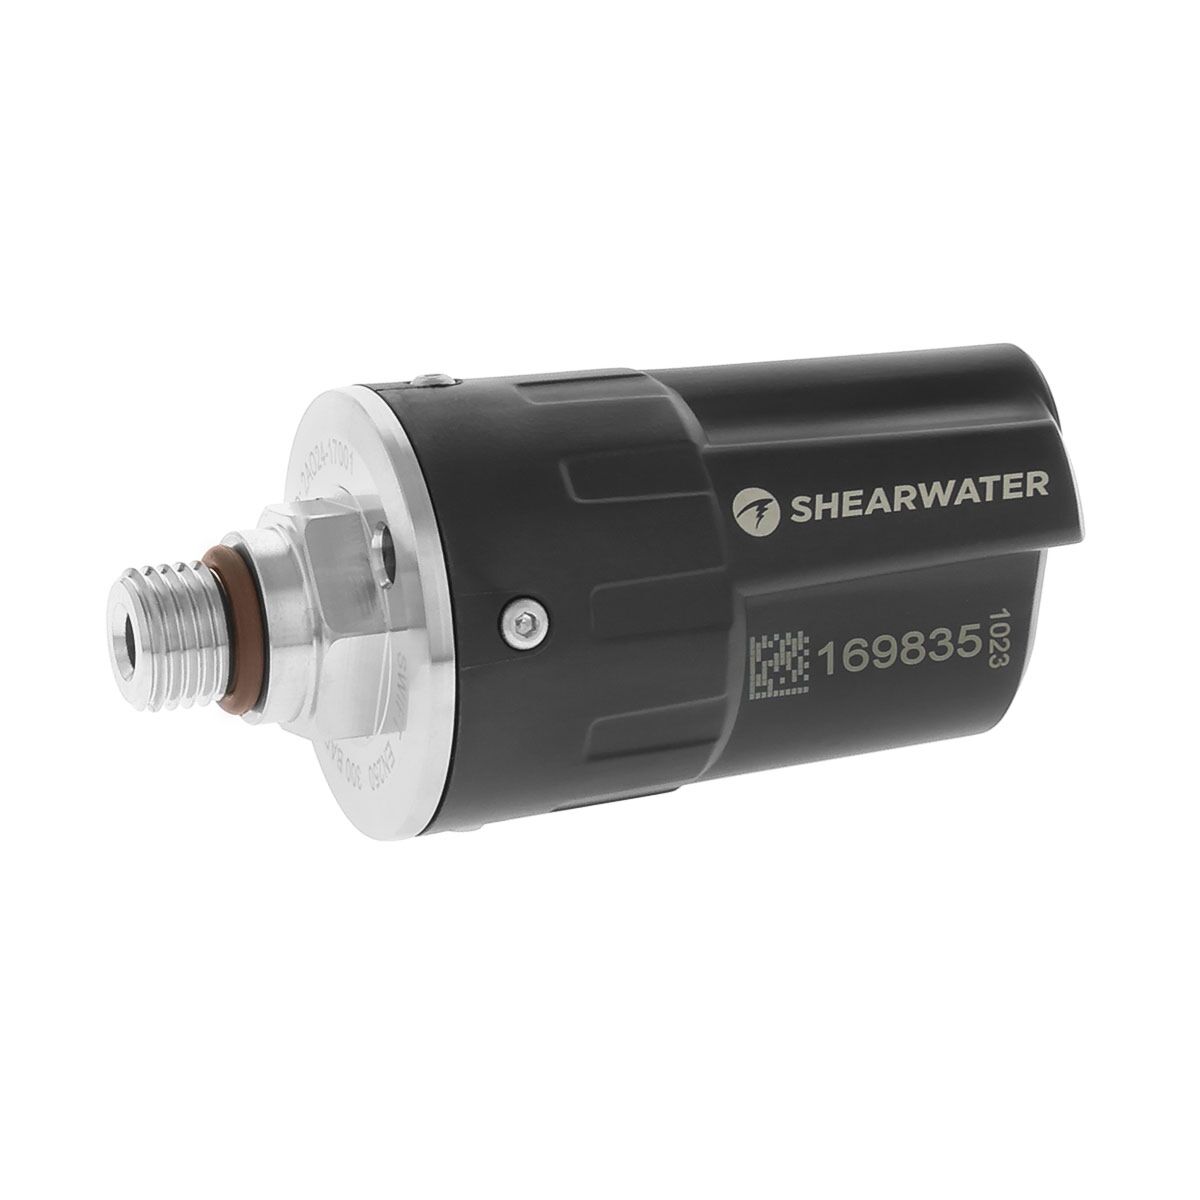 Shearwater Research SWIFT Transmitter (MH-8A Compatible)